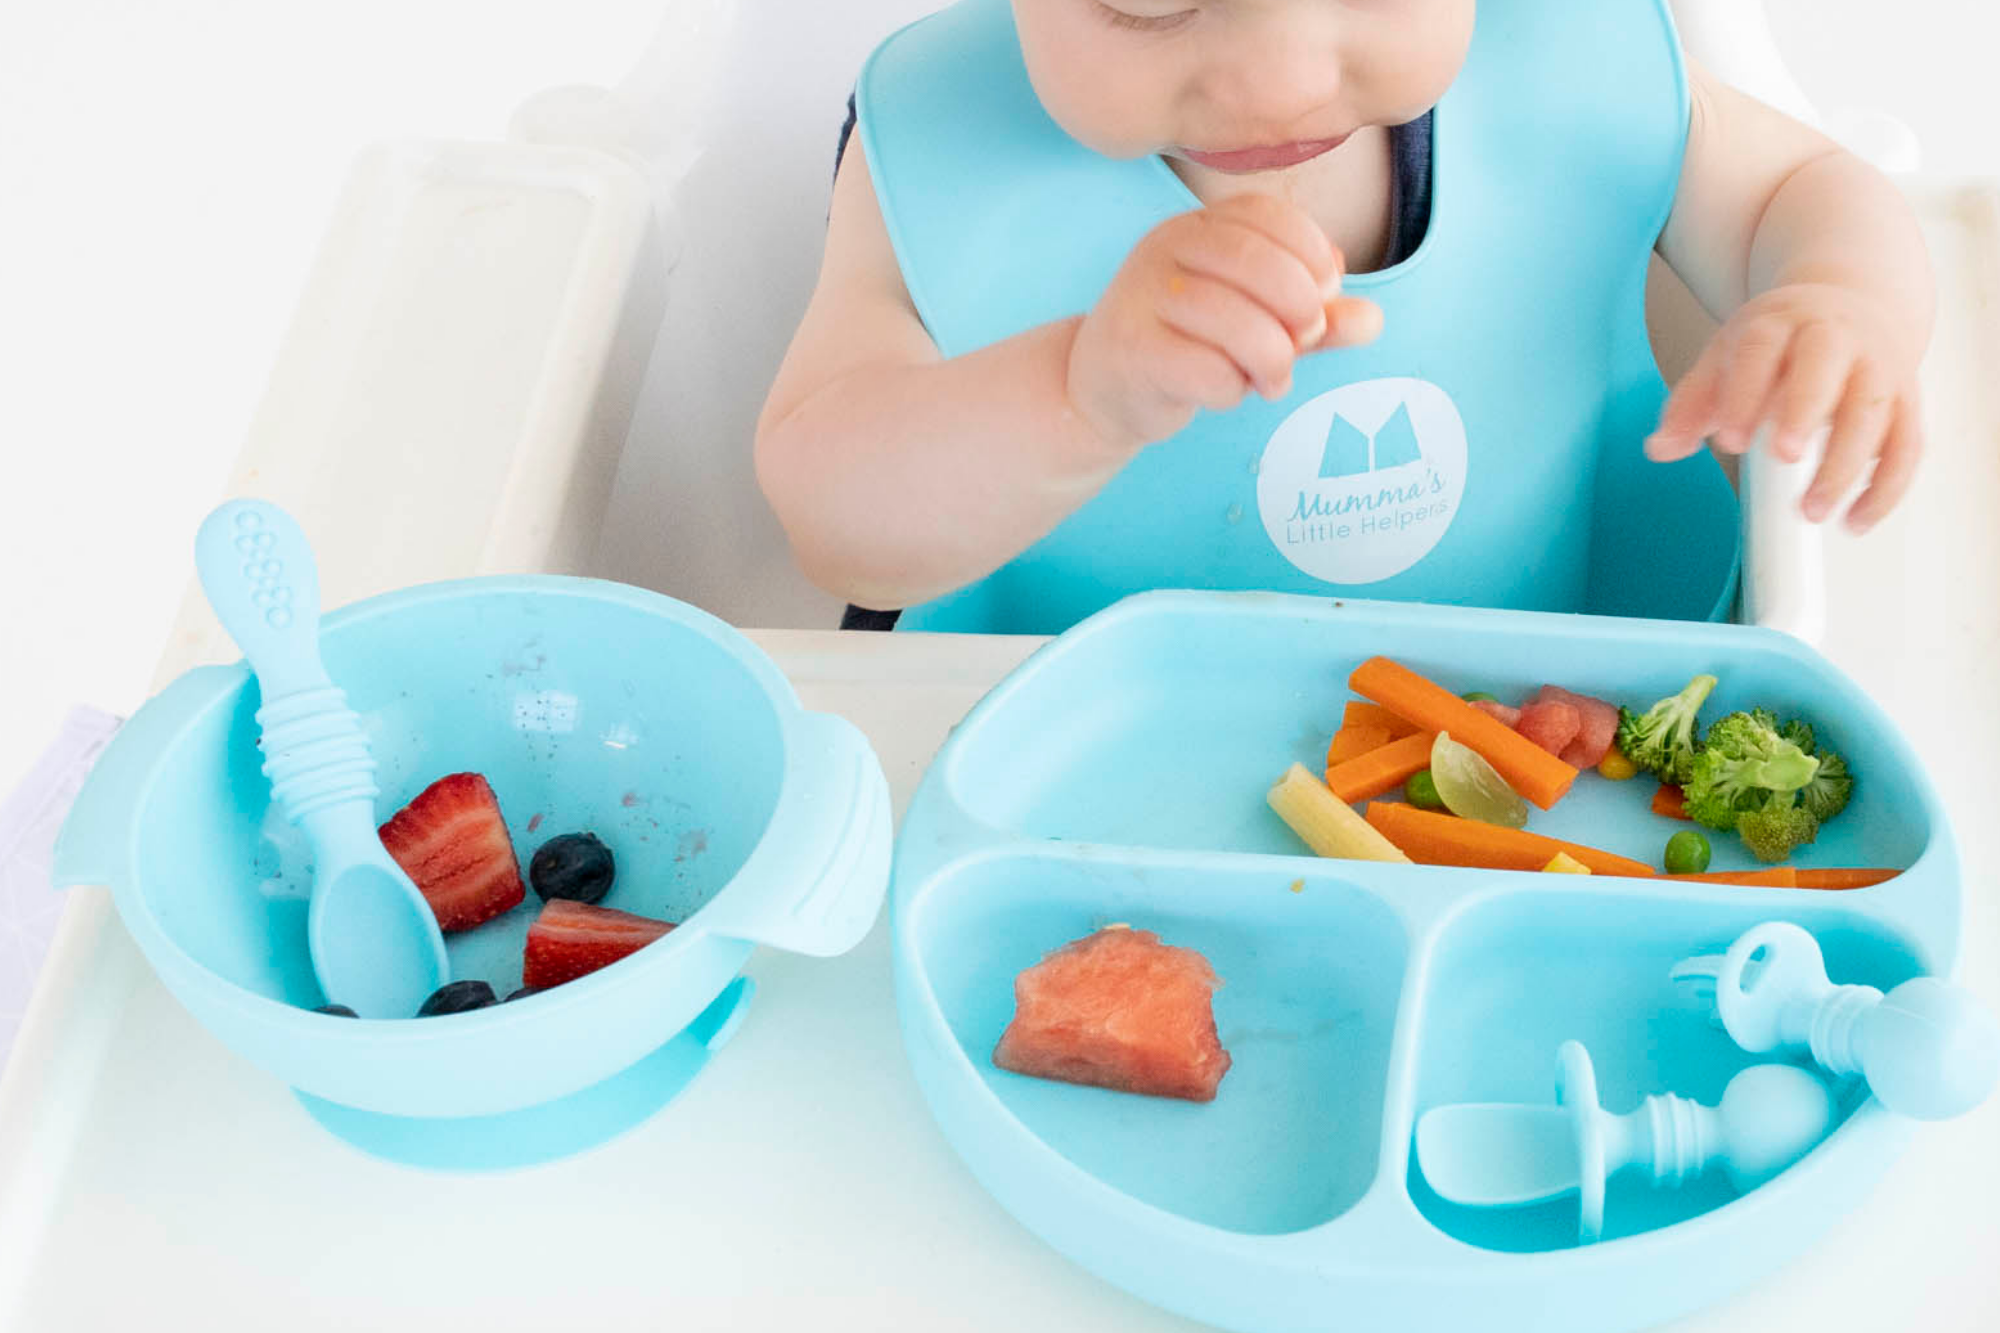 Baby and Toddler Feeding Supplies Set – Shopsterbizz